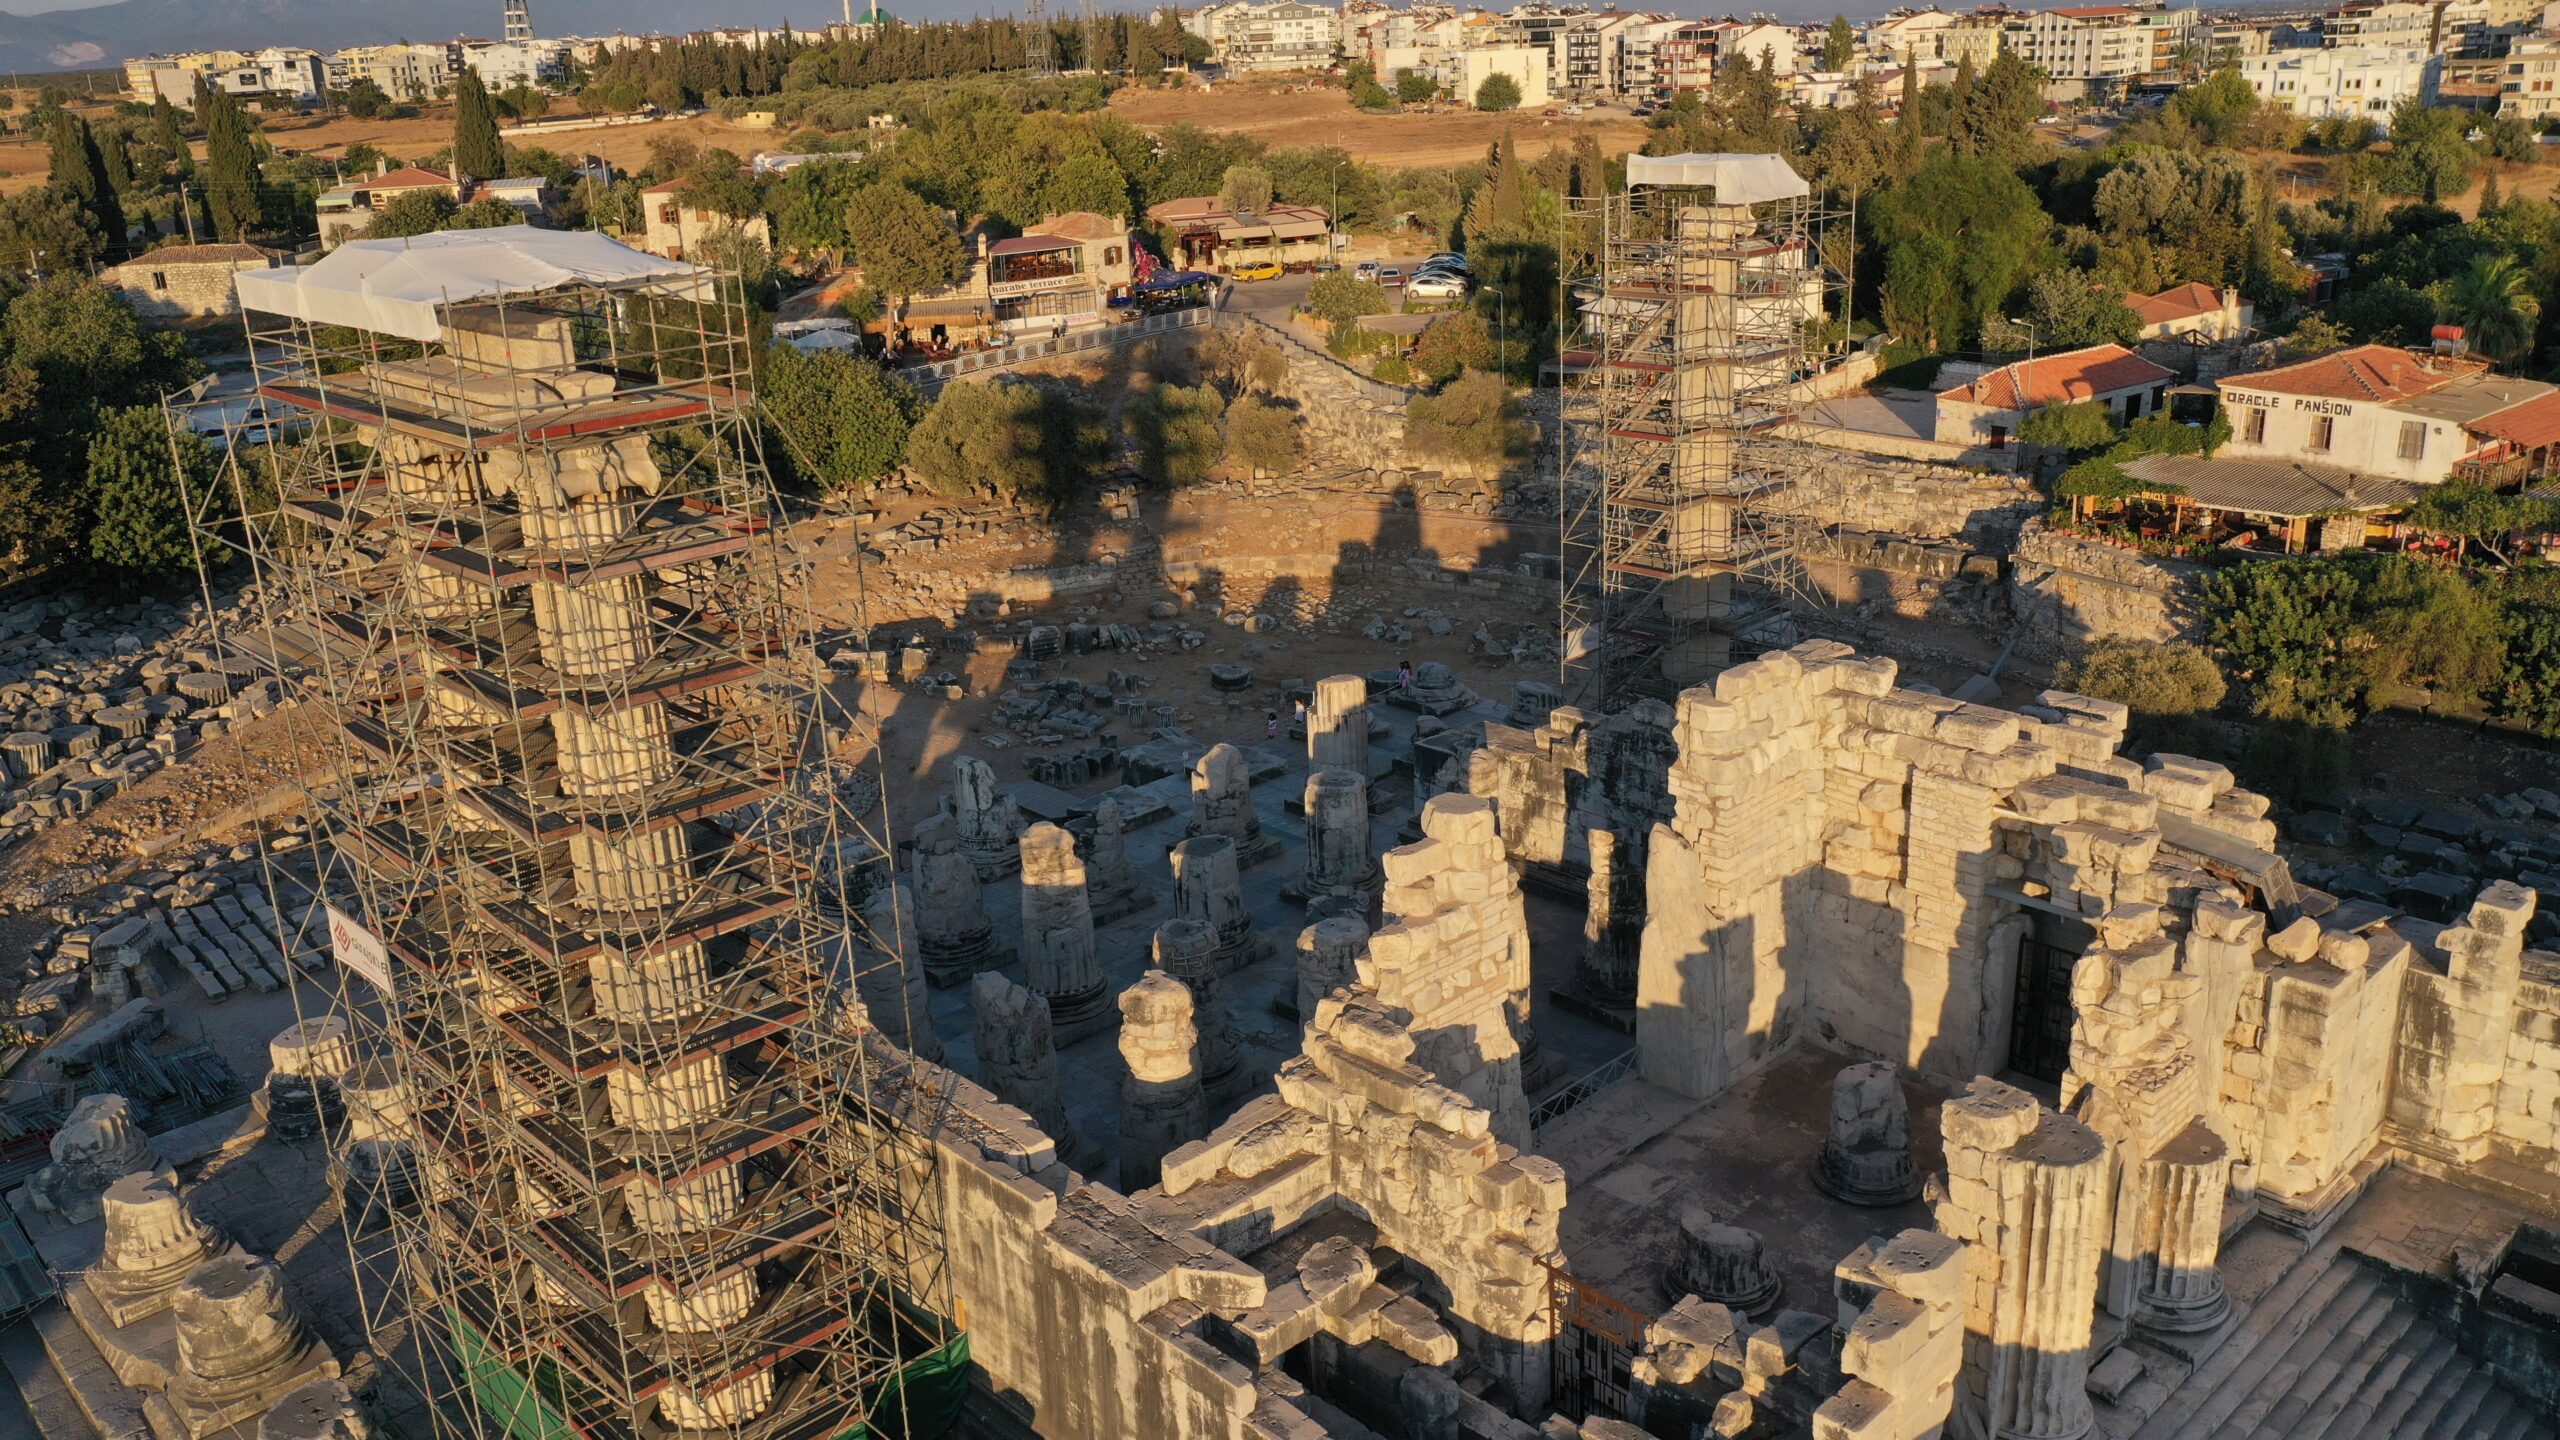 In Turkey, the columns of the ancient temple of Apollo are being restored